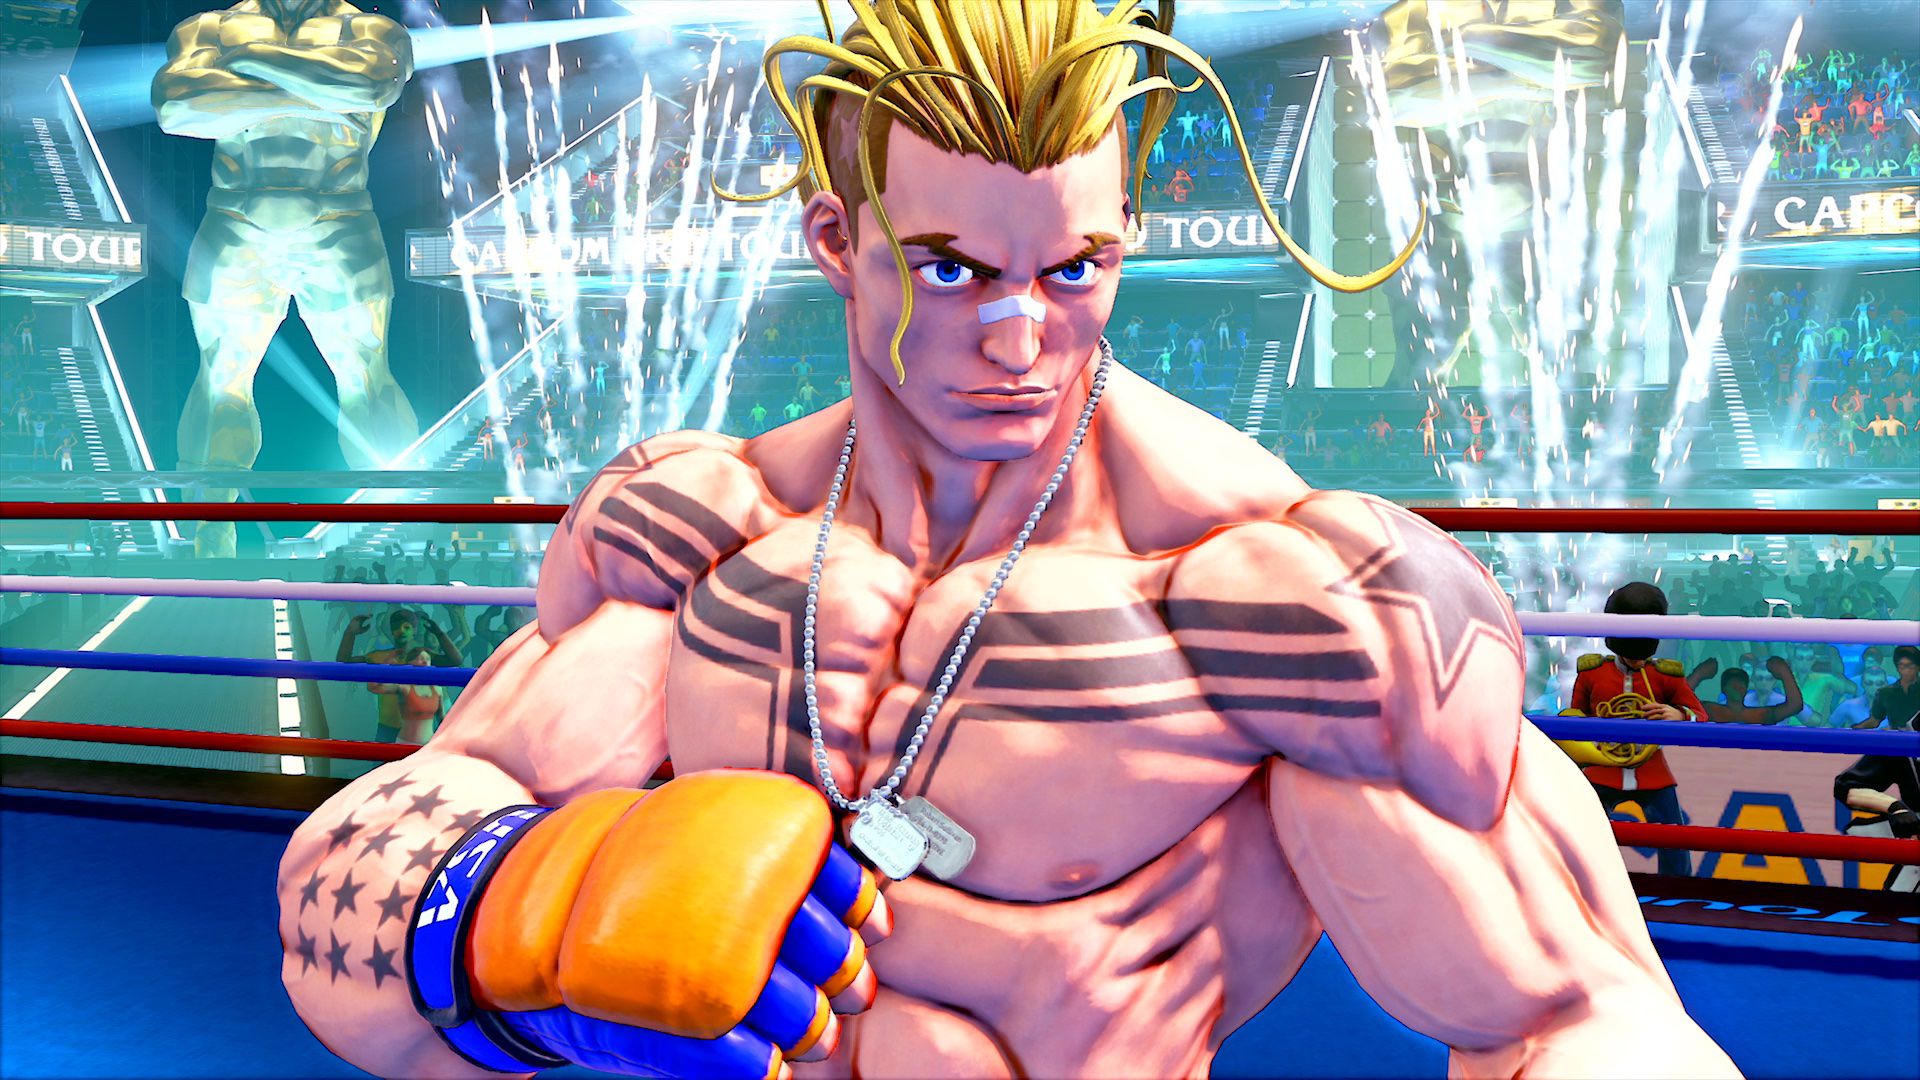 Street Fighter 5's DLC characters can be earned for free through